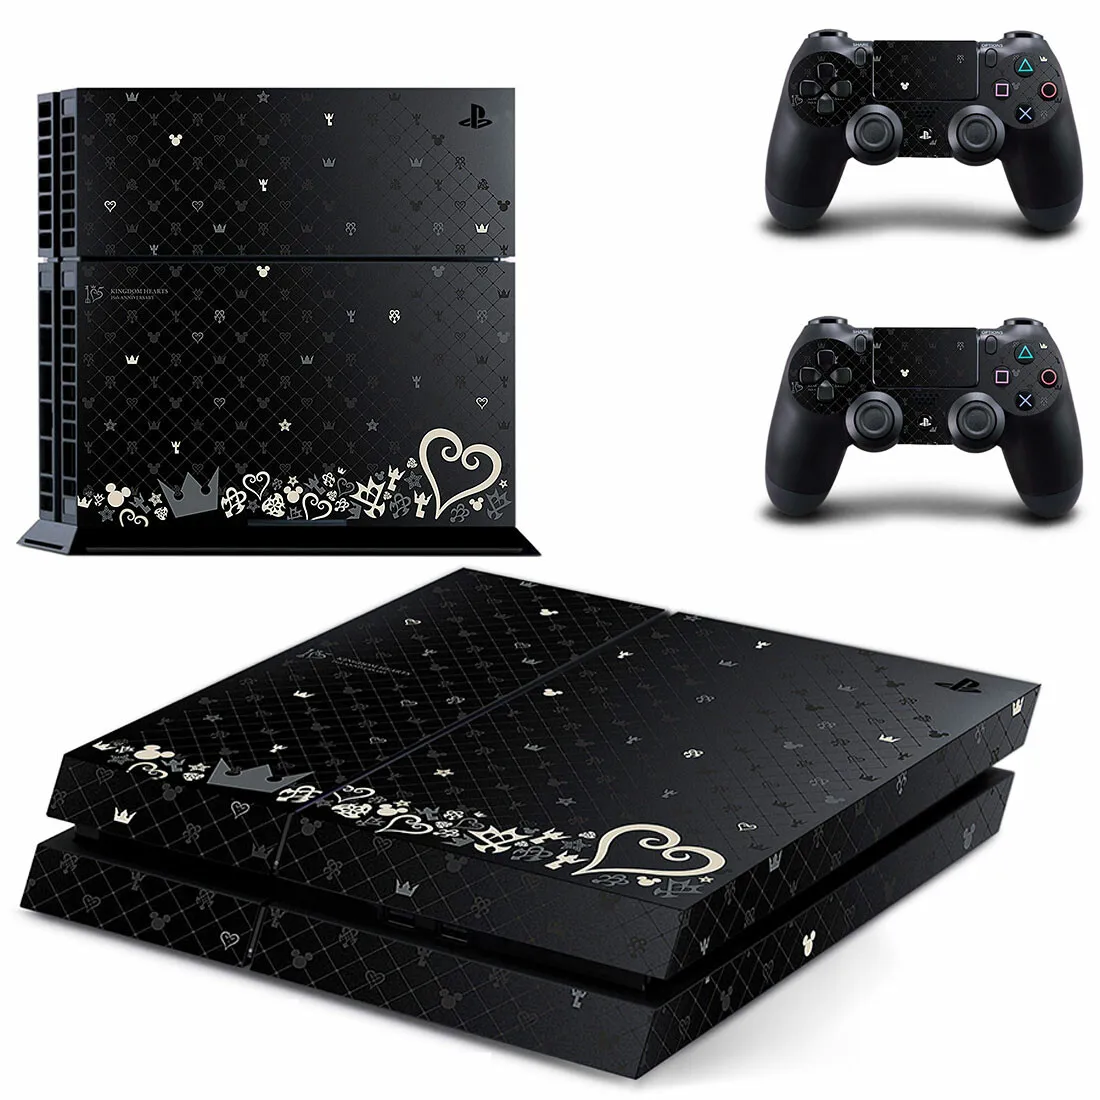 Kingdom Hearts PS4 Stickers Play station 4 Skin Sticker Decals Cover For PlayStation 4 PS4 Console & Controller Skins Vinyl